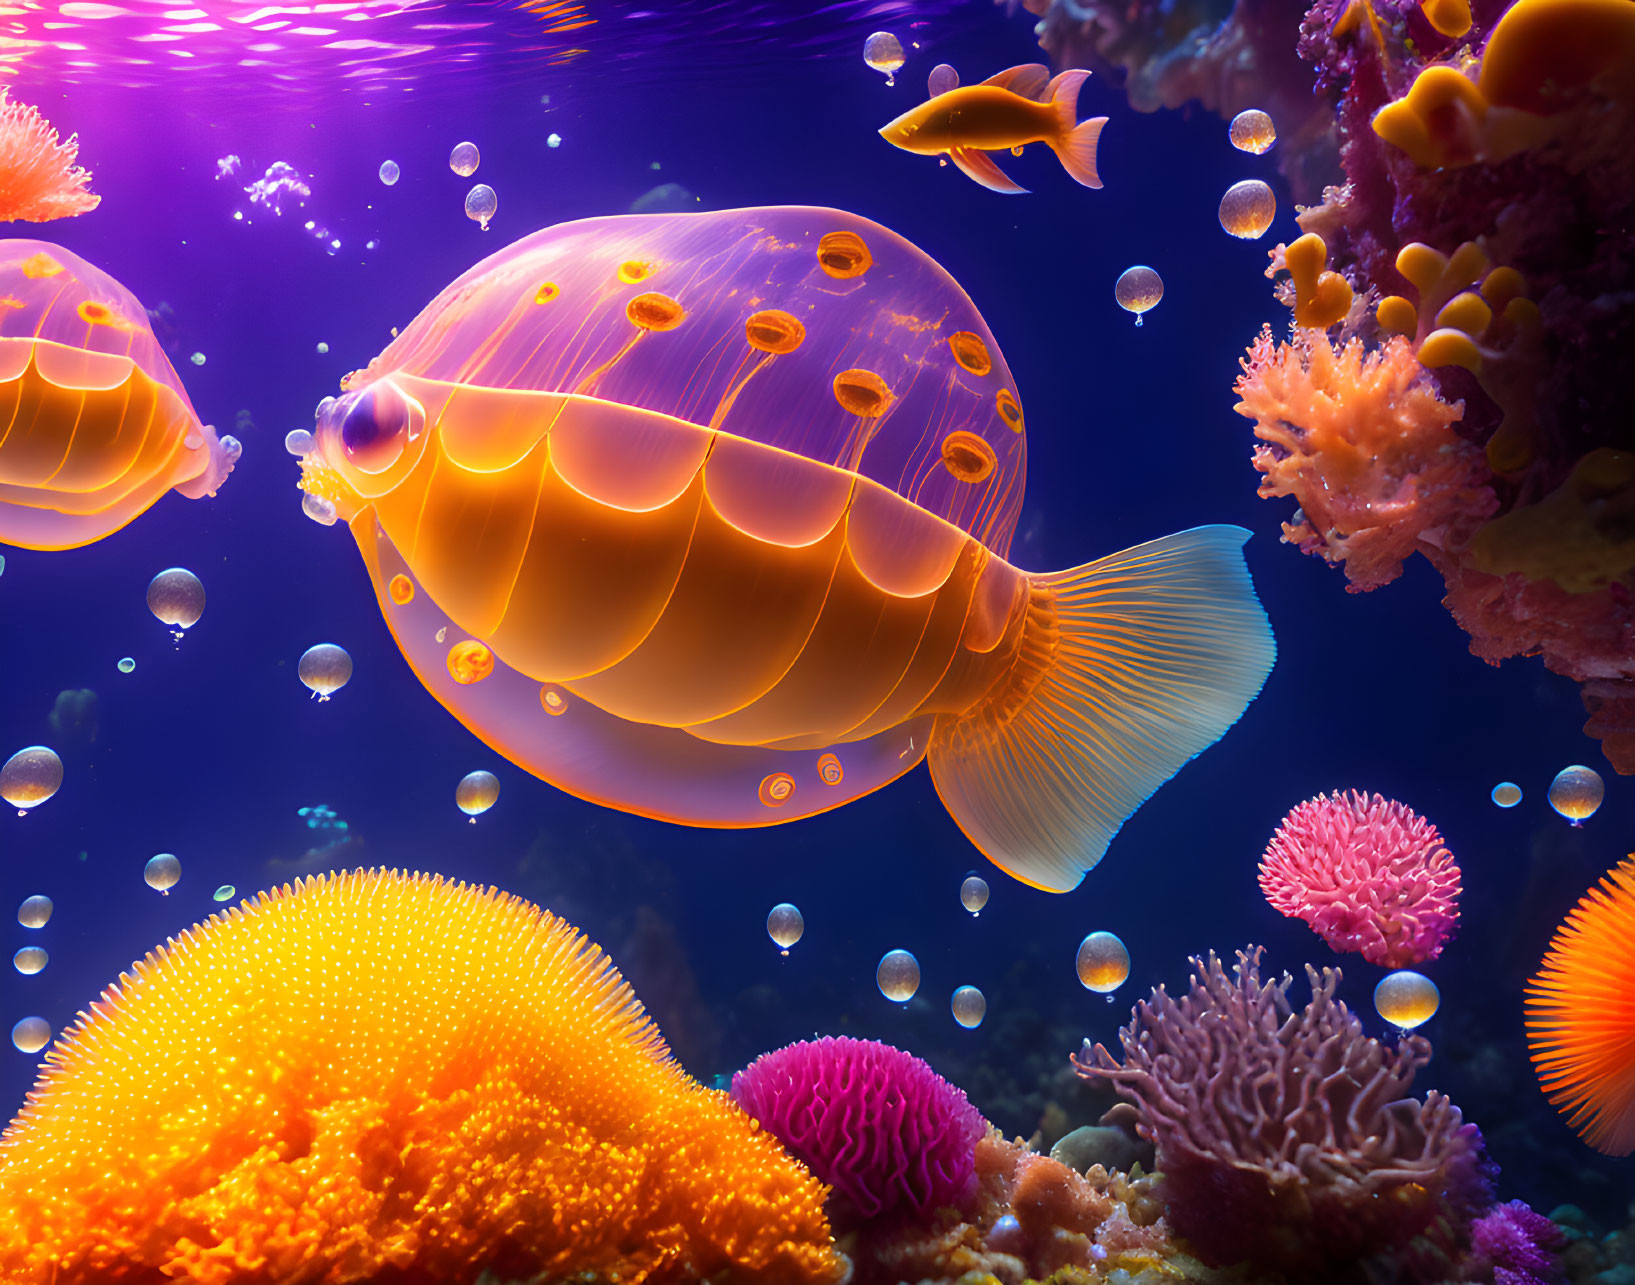 Colorful Underwater Scene with Golden Fish and Coral Reefs